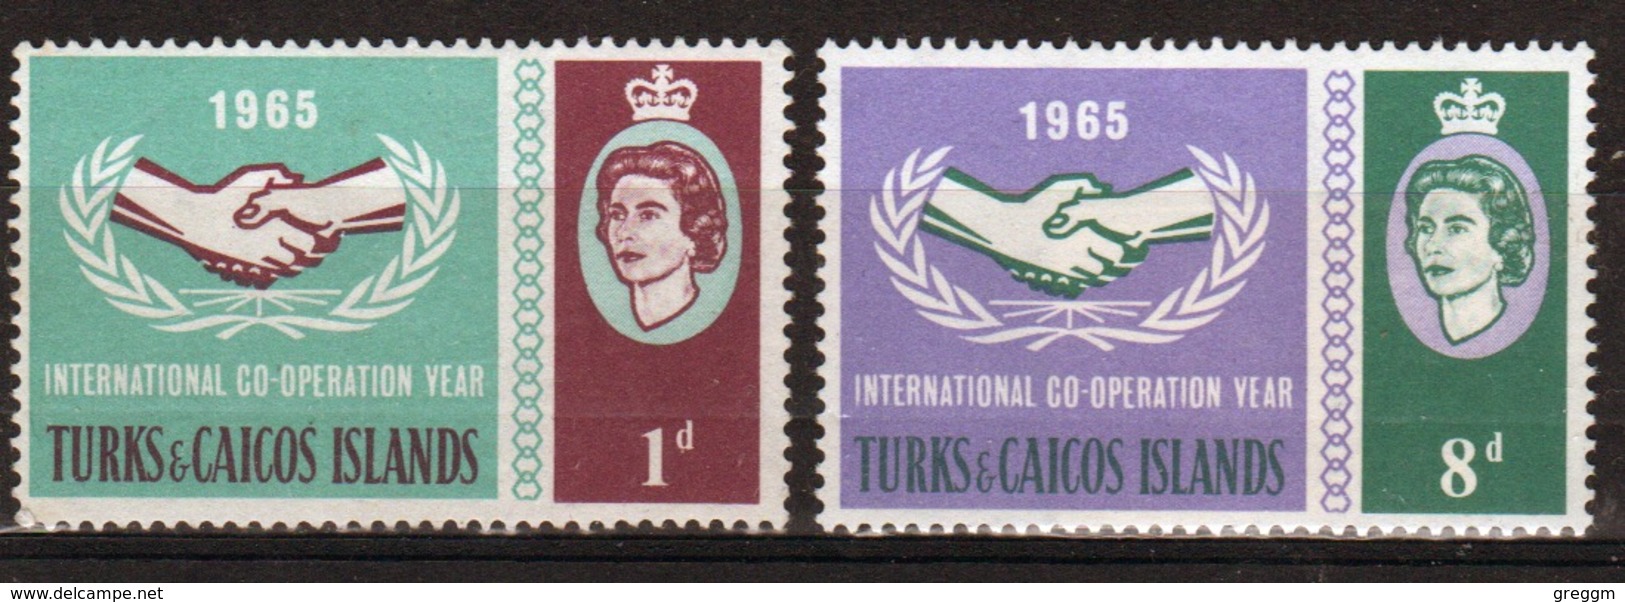 Turks And Caicos Set Of Stamps To Celebrate International Co-operation Year 1965 - Turks And Caicos